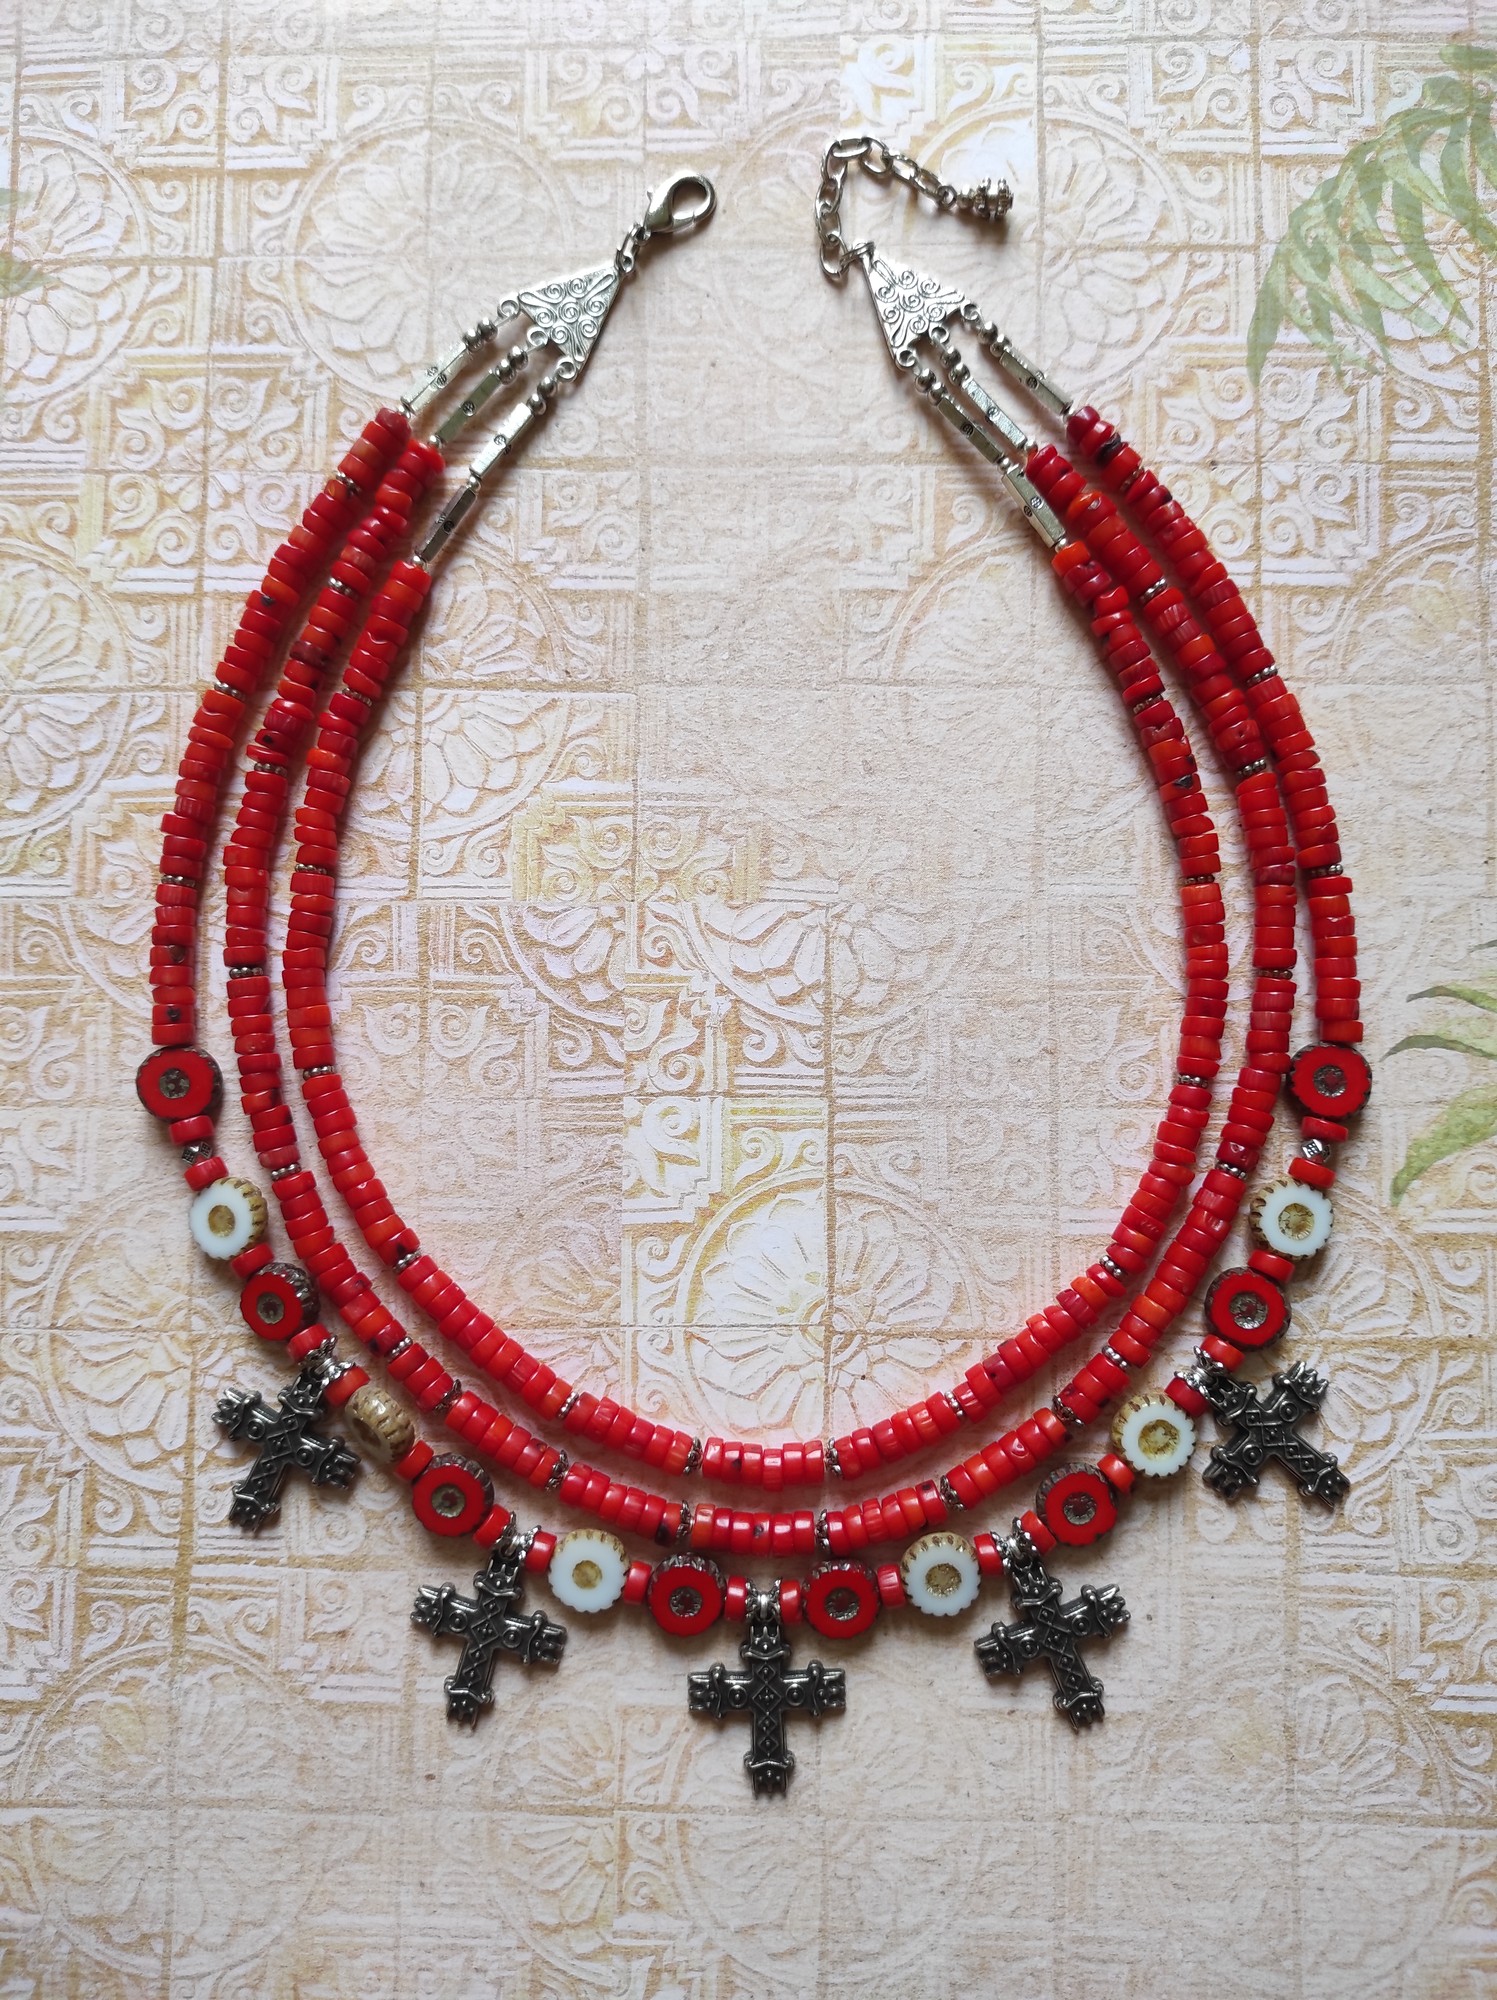 Necklace zgarda "Coral corolla" from glass beads and coral